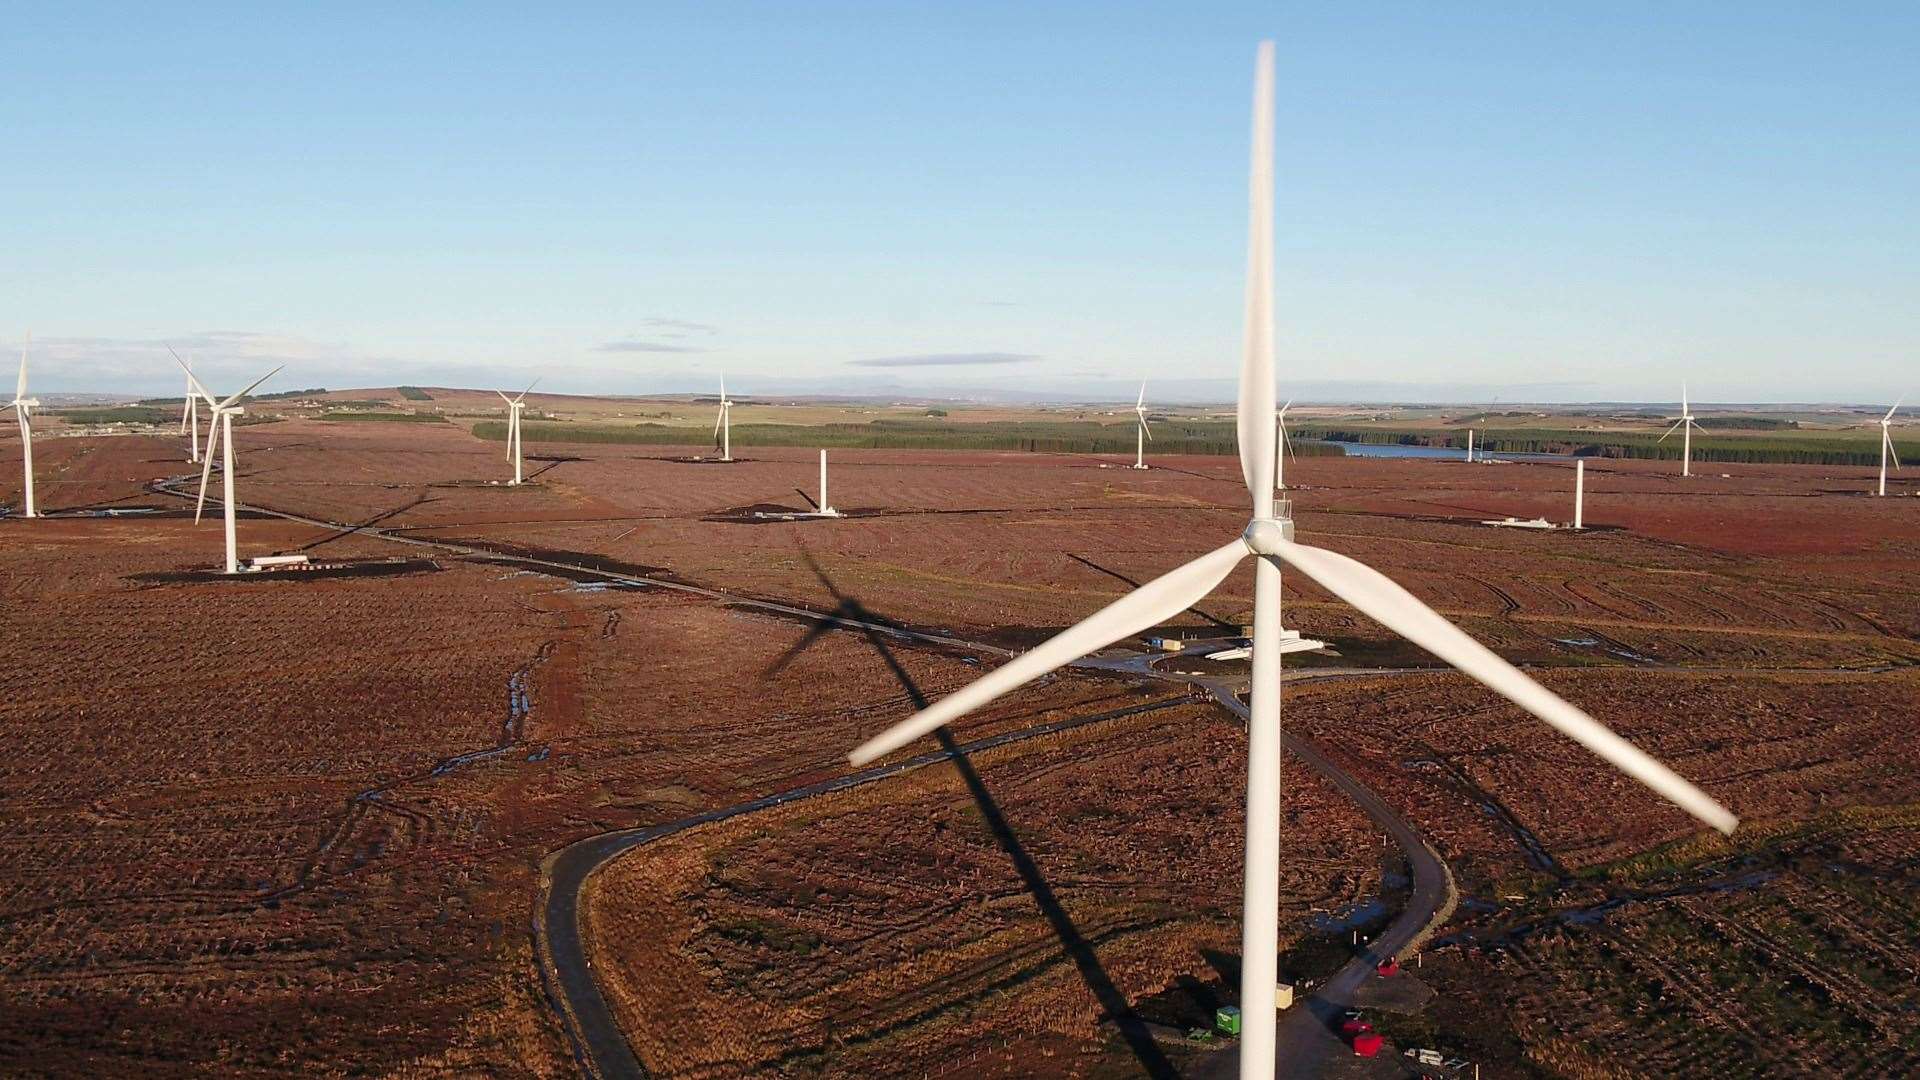 Halsary Windfarm will have 15 turbines and is expected to be fully operational in the first quarter of 2021.